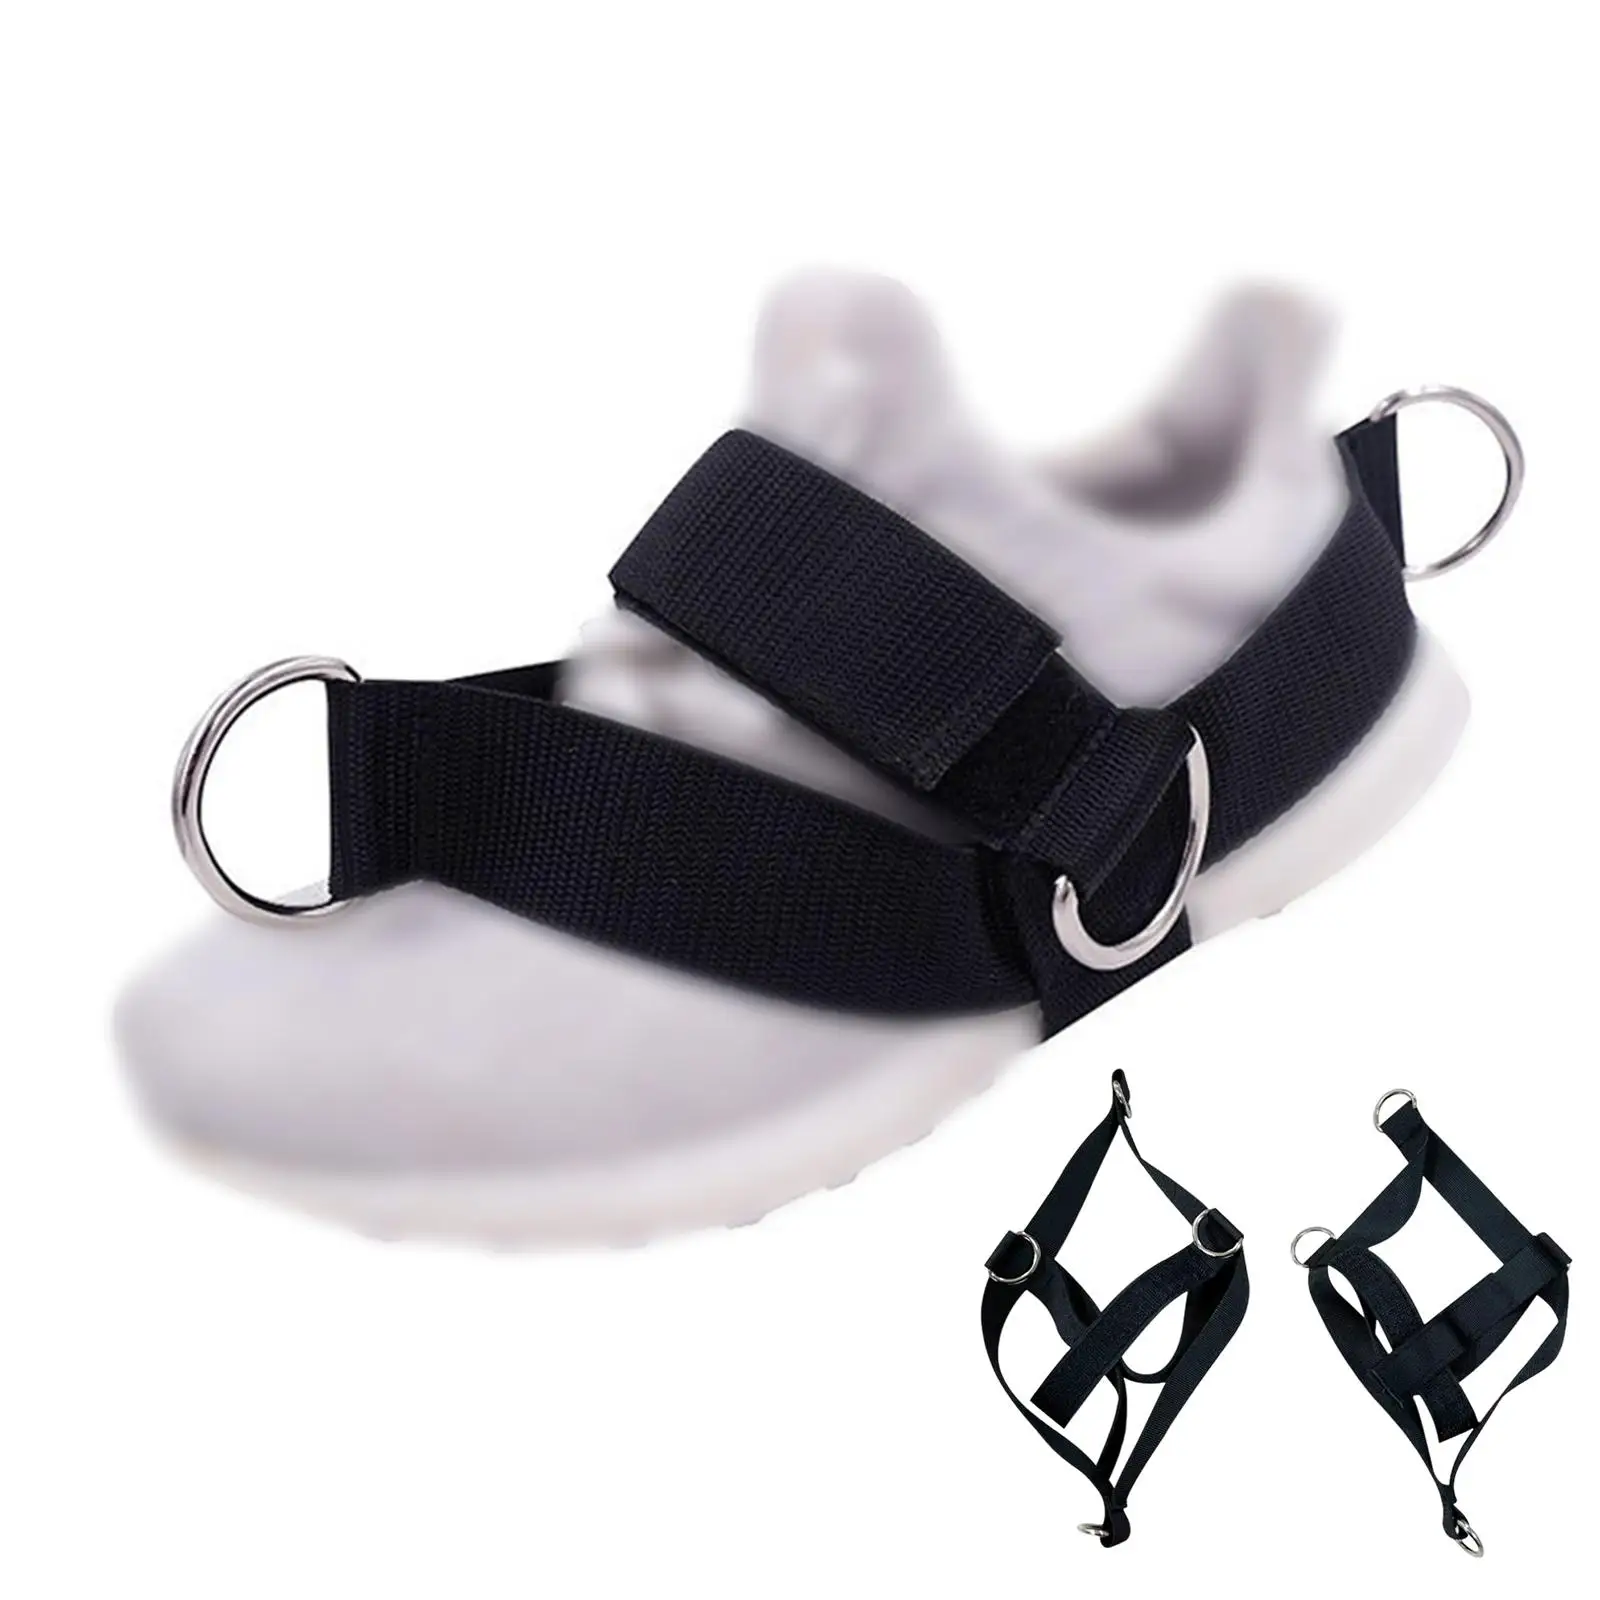 2 Pieces Adjustable Foot Strap with 4 connecting Points Multipurpose Women Men Nylon Resistance Band for Bodybuilding Fitness